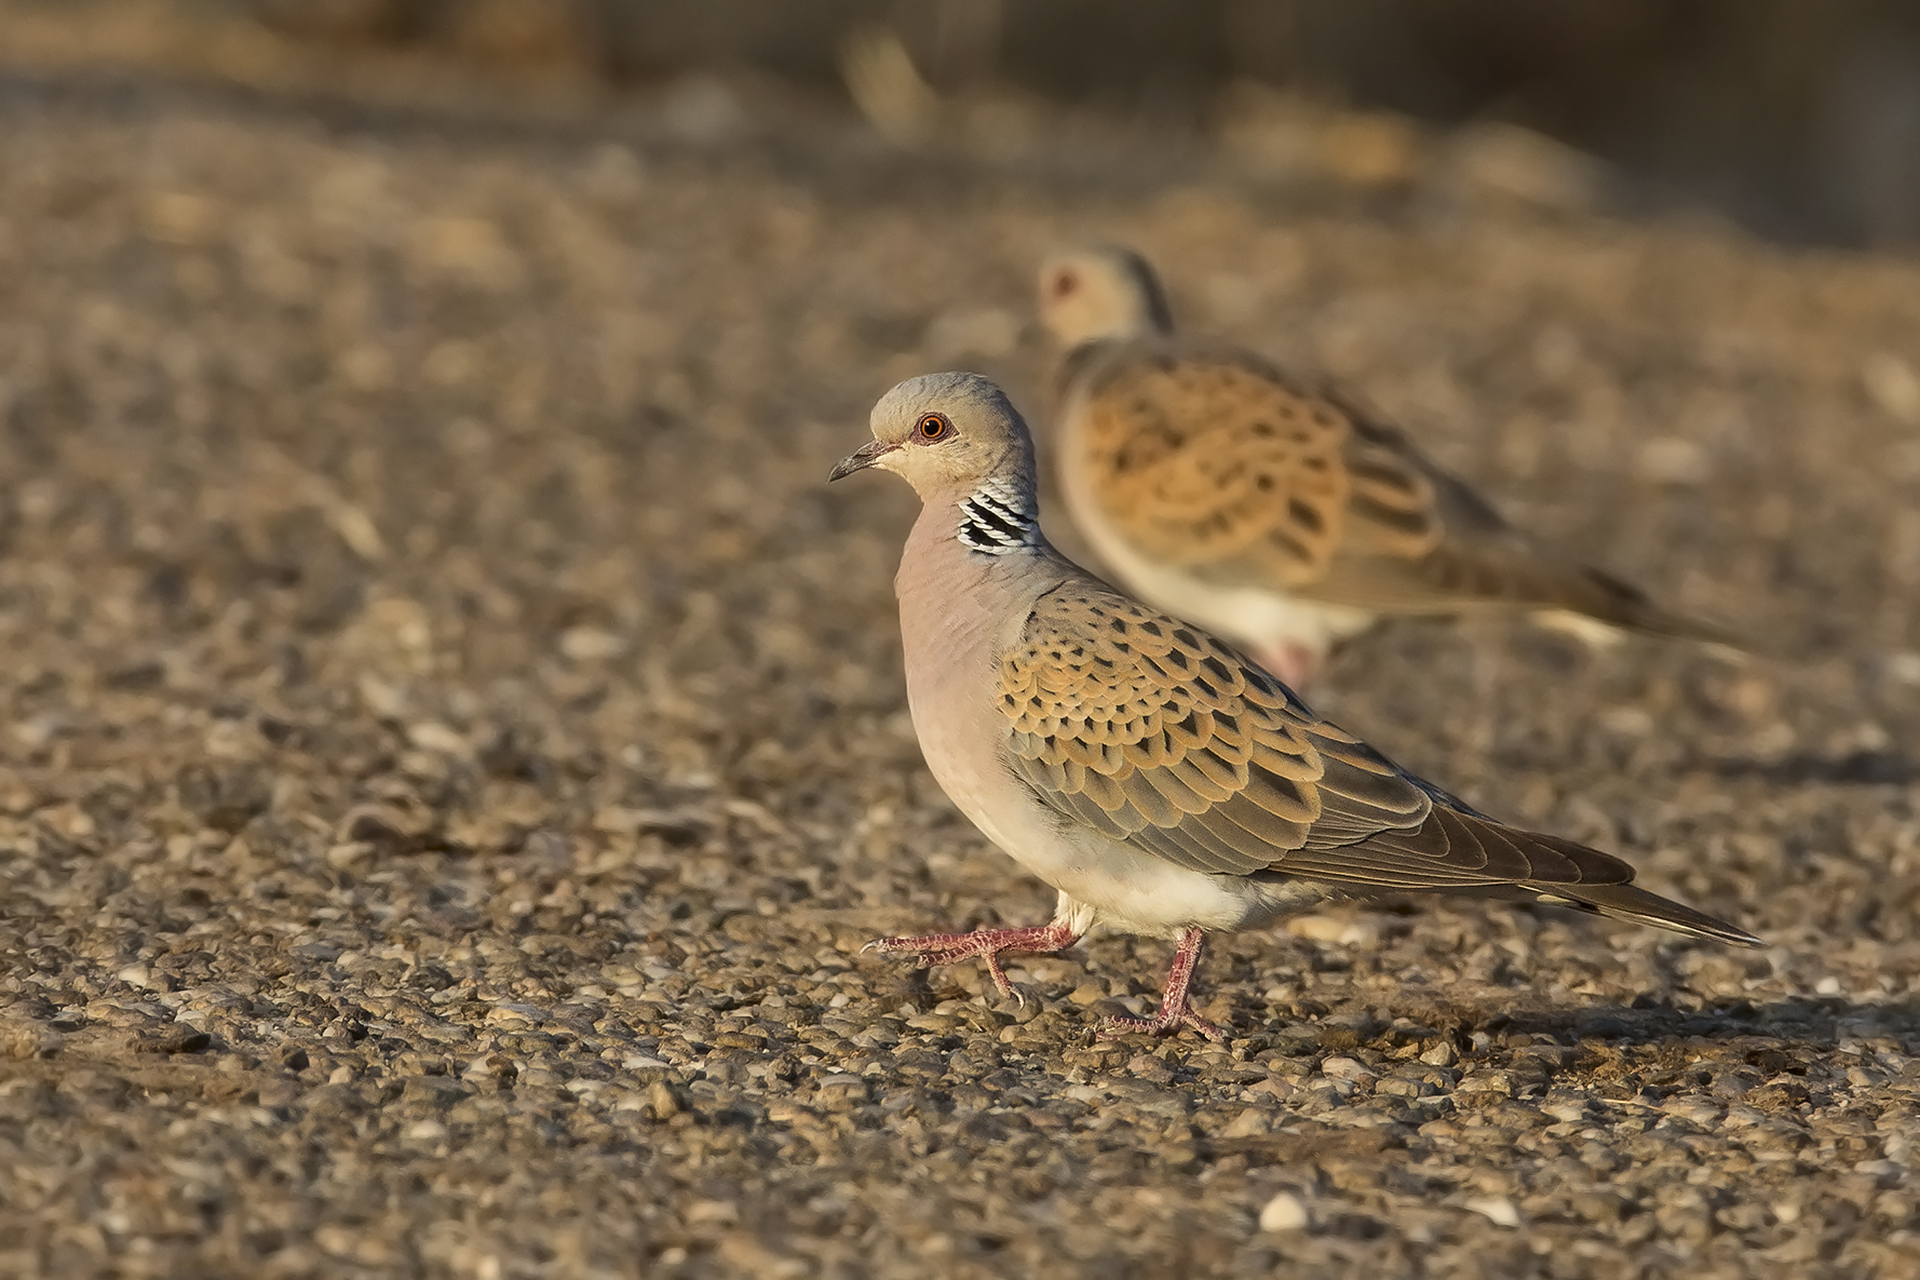 turtle dove at sunset...